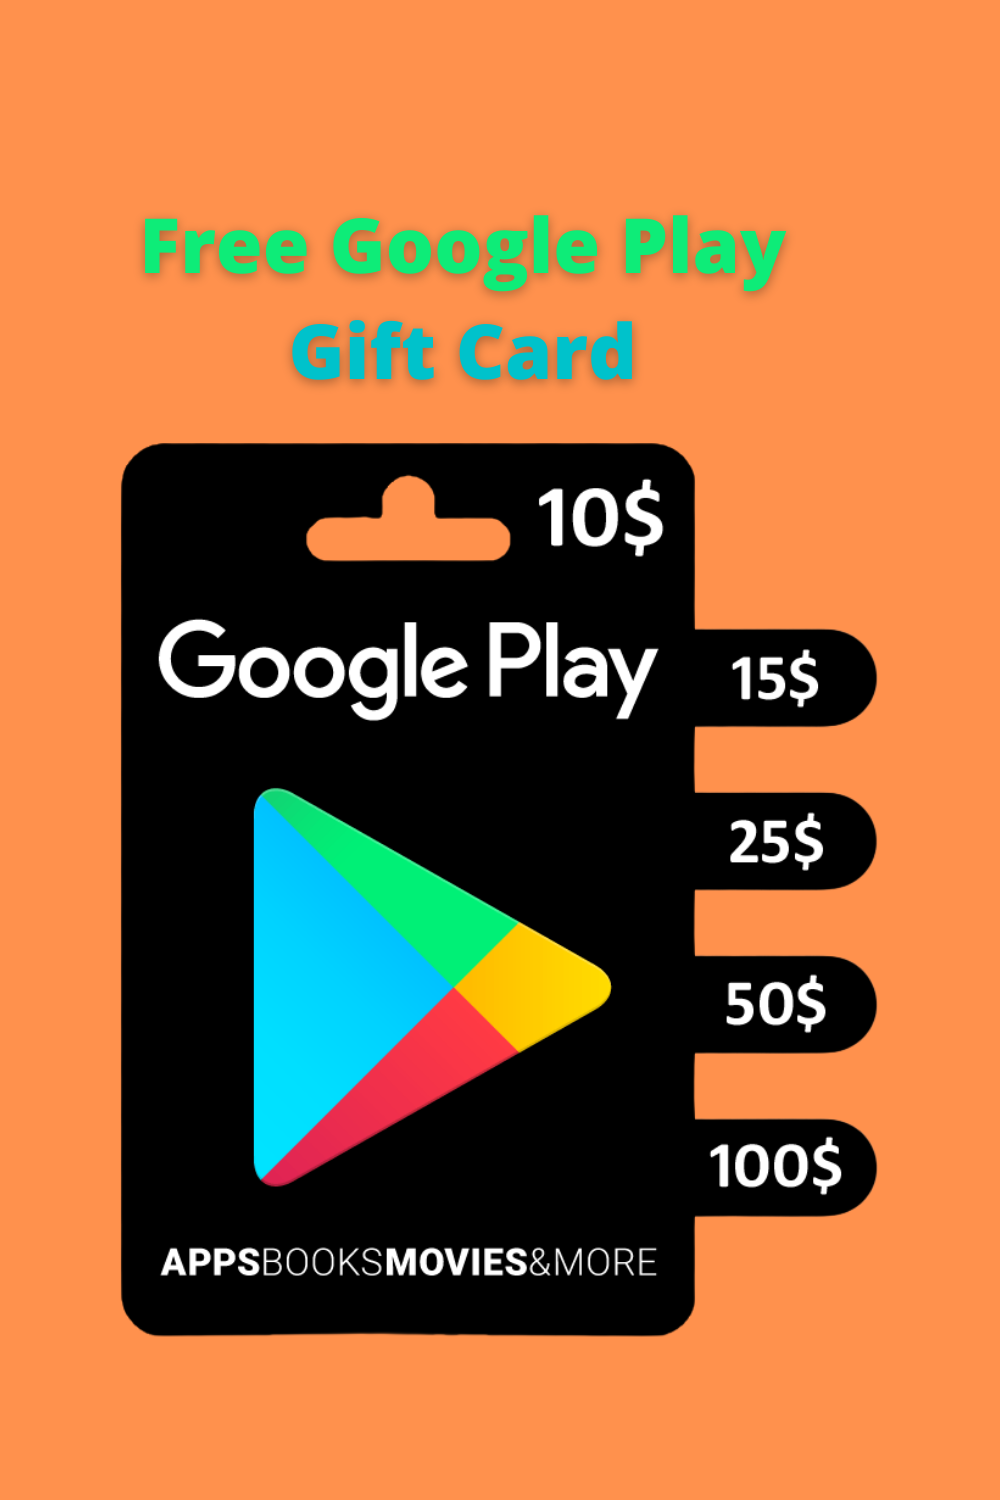 $100 Google Play Gift Card Giveaway: Unlock Free Apps!